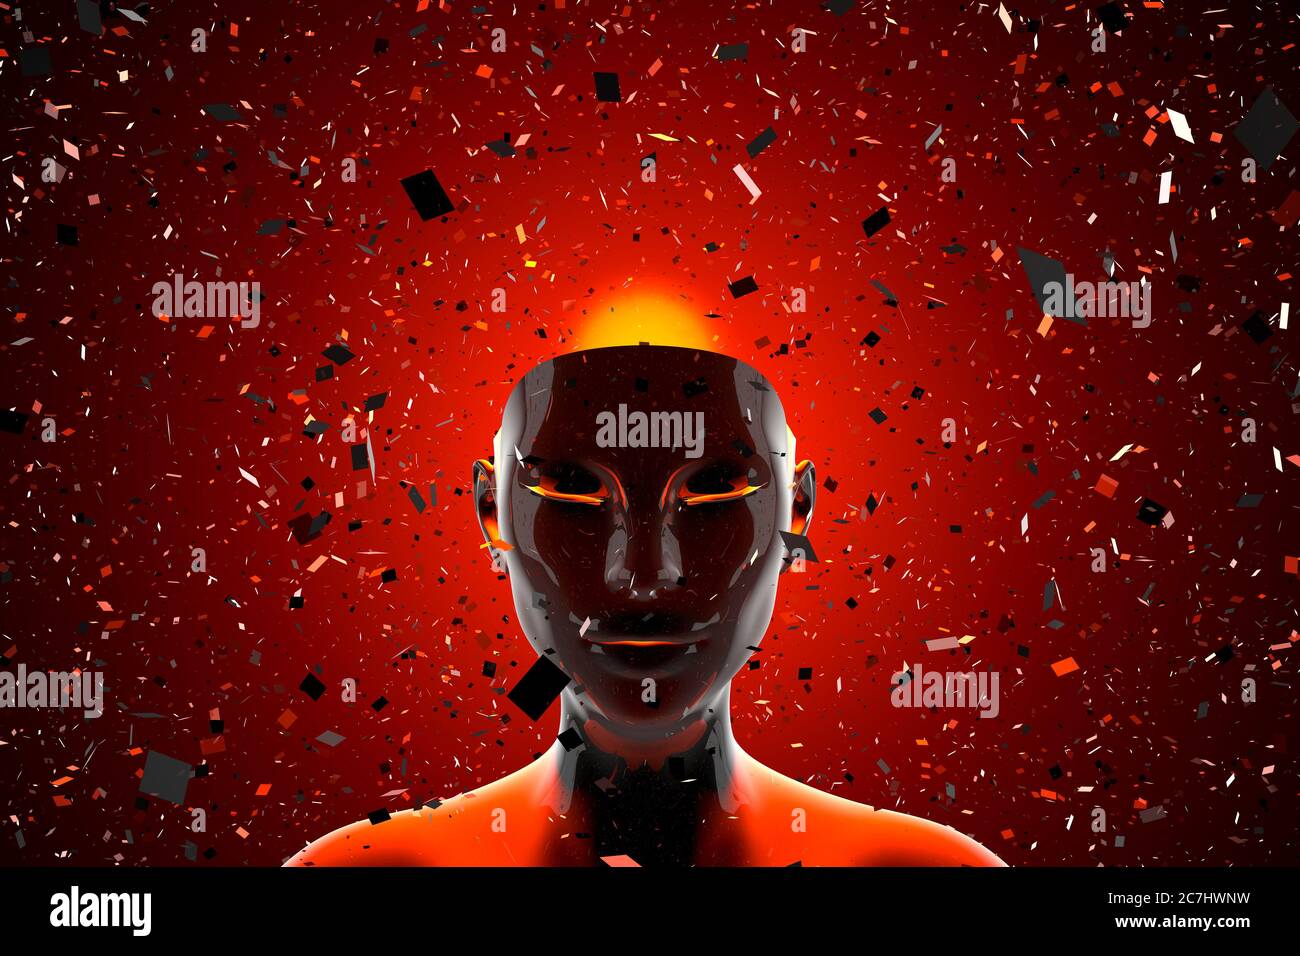 3D illustration of a head dissolving into fragments symbolising either a thinking mind or a artificial intelligence. Stock Photo